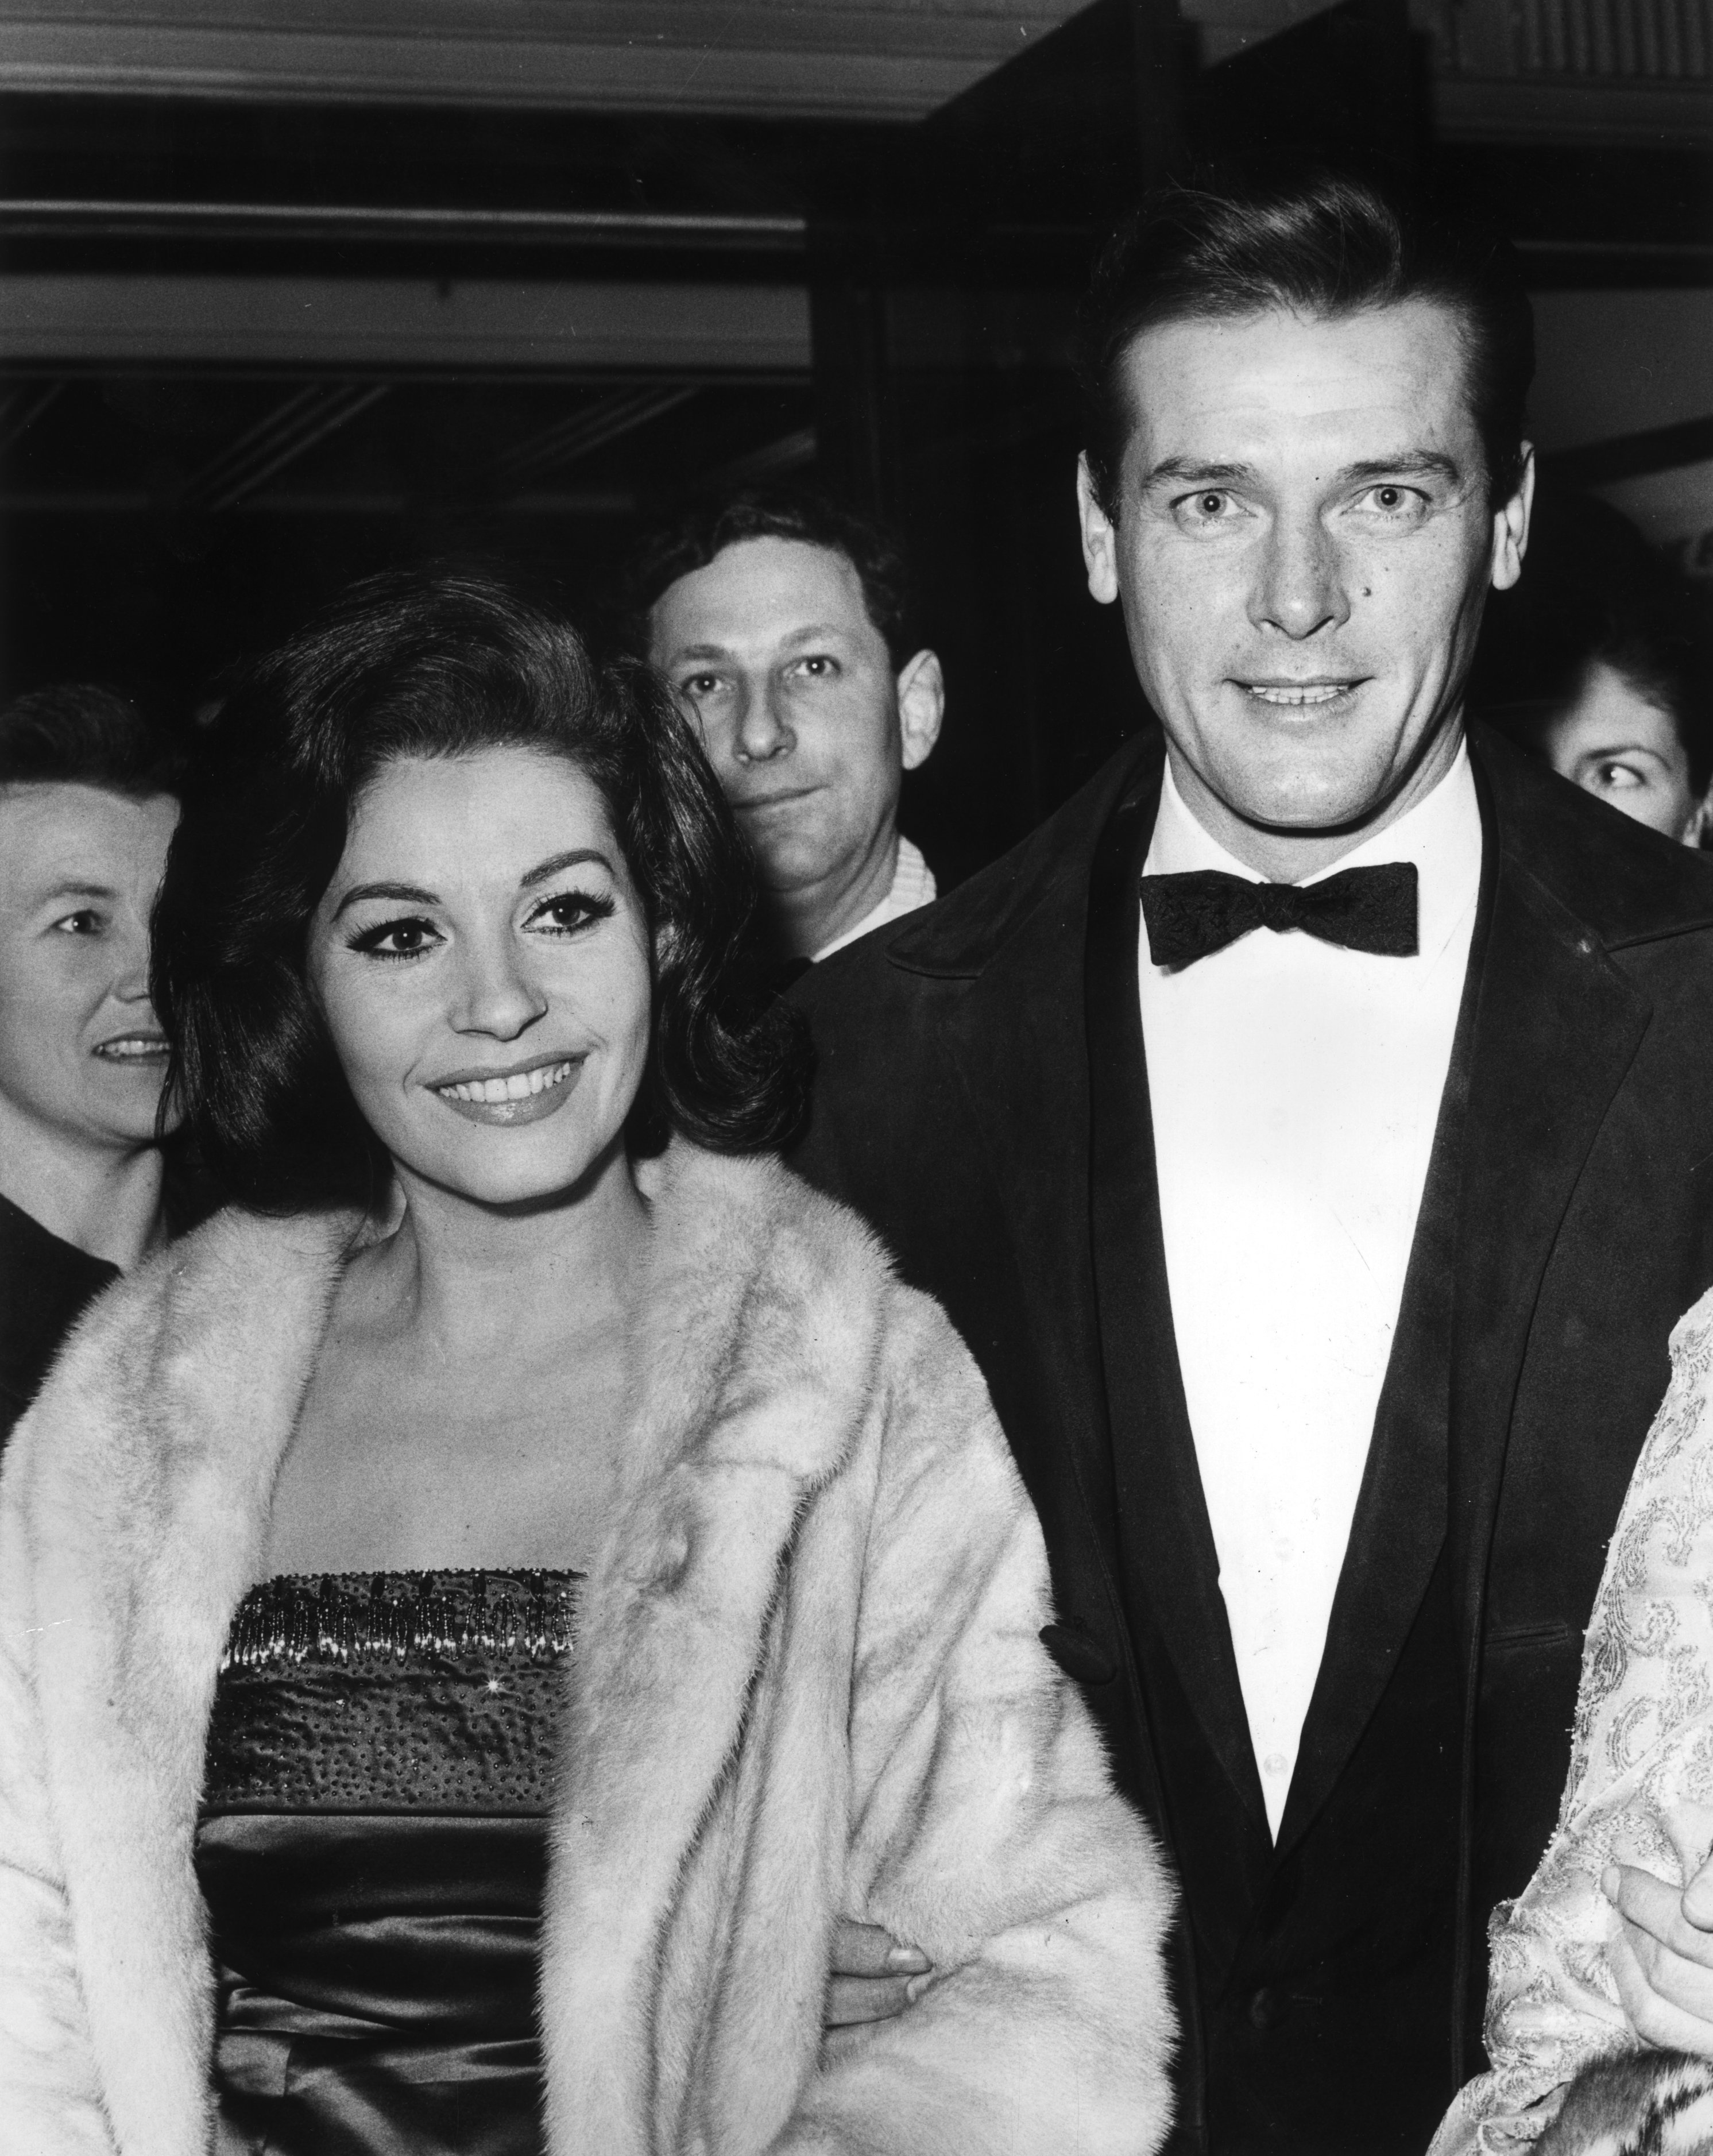  Roger Moore at a London film premiere with his fiancee Luisa Mattioli on November 26,1968 | Source: Getty Images